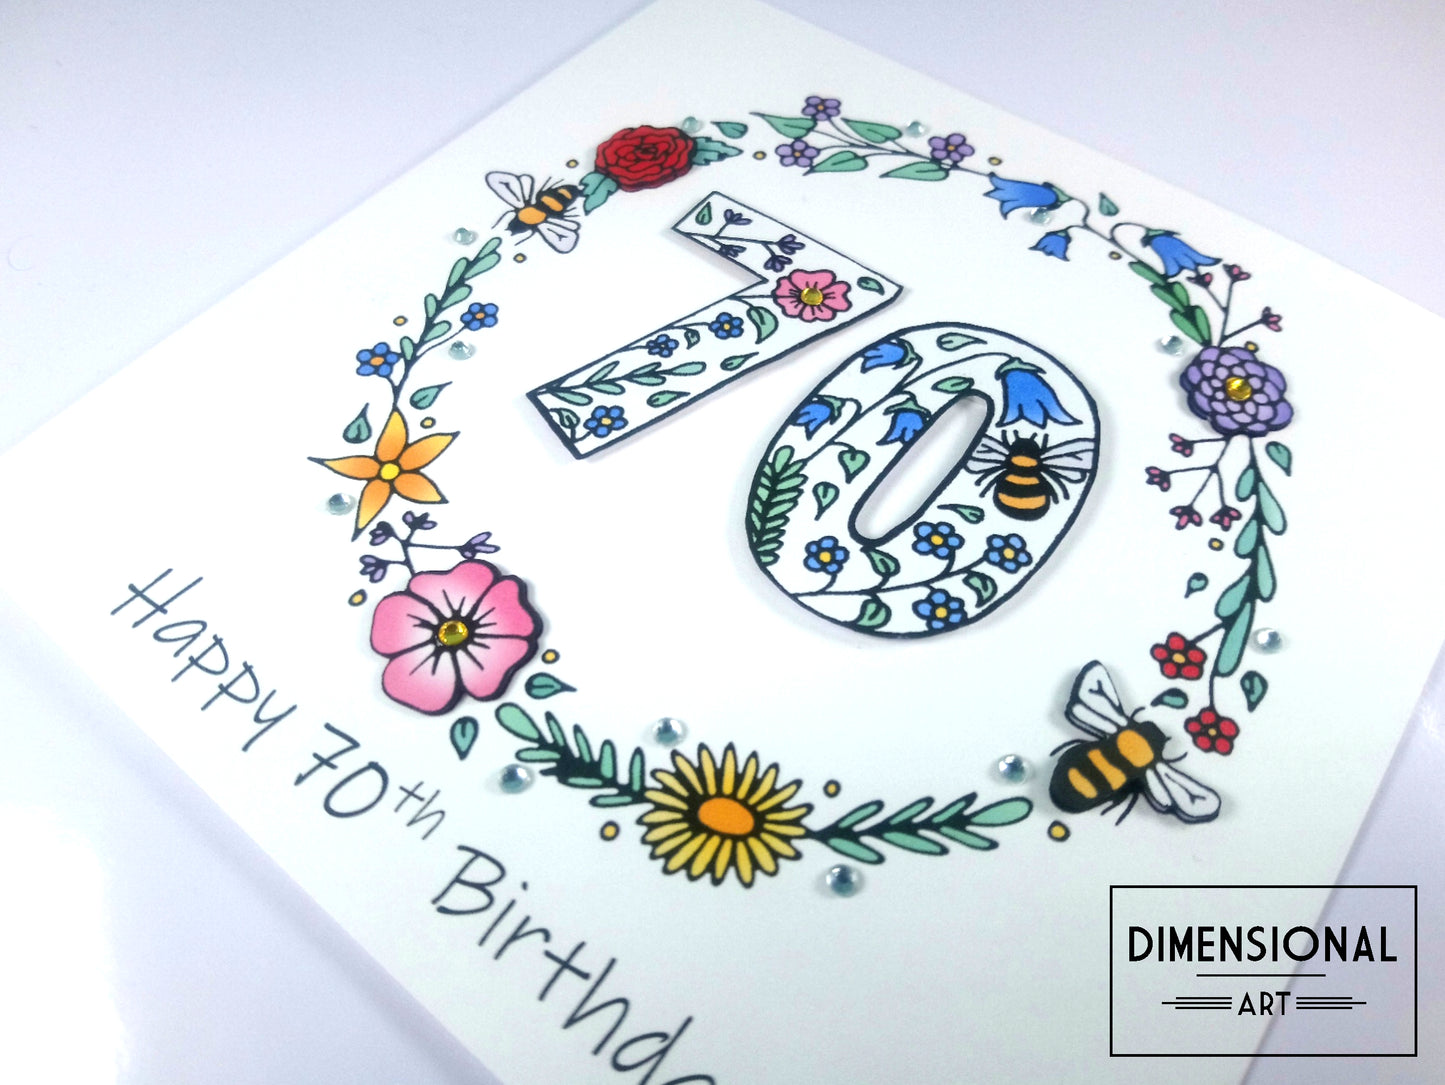 70th Flowers and Bees Birthday Card